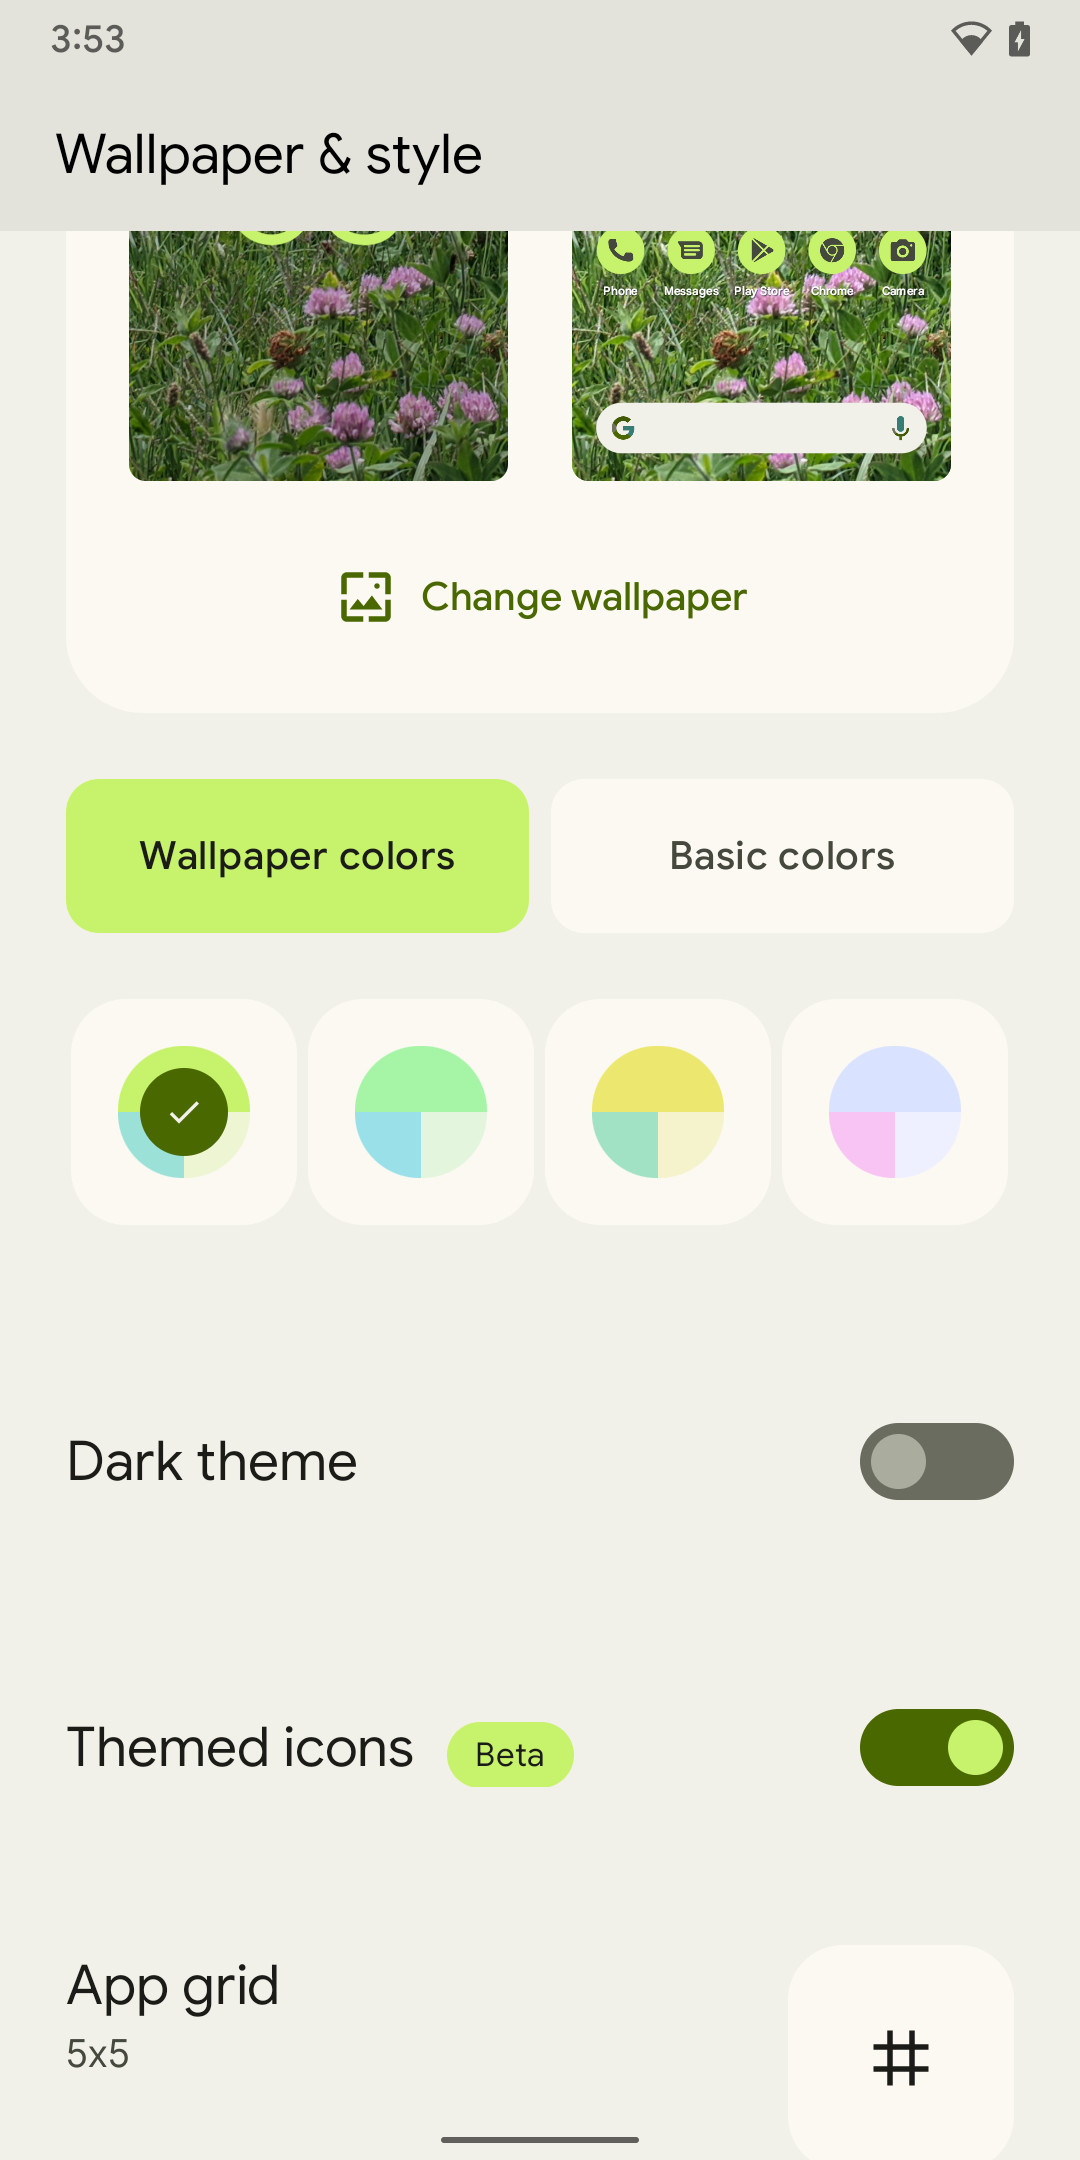 You can tweak your theme colors.